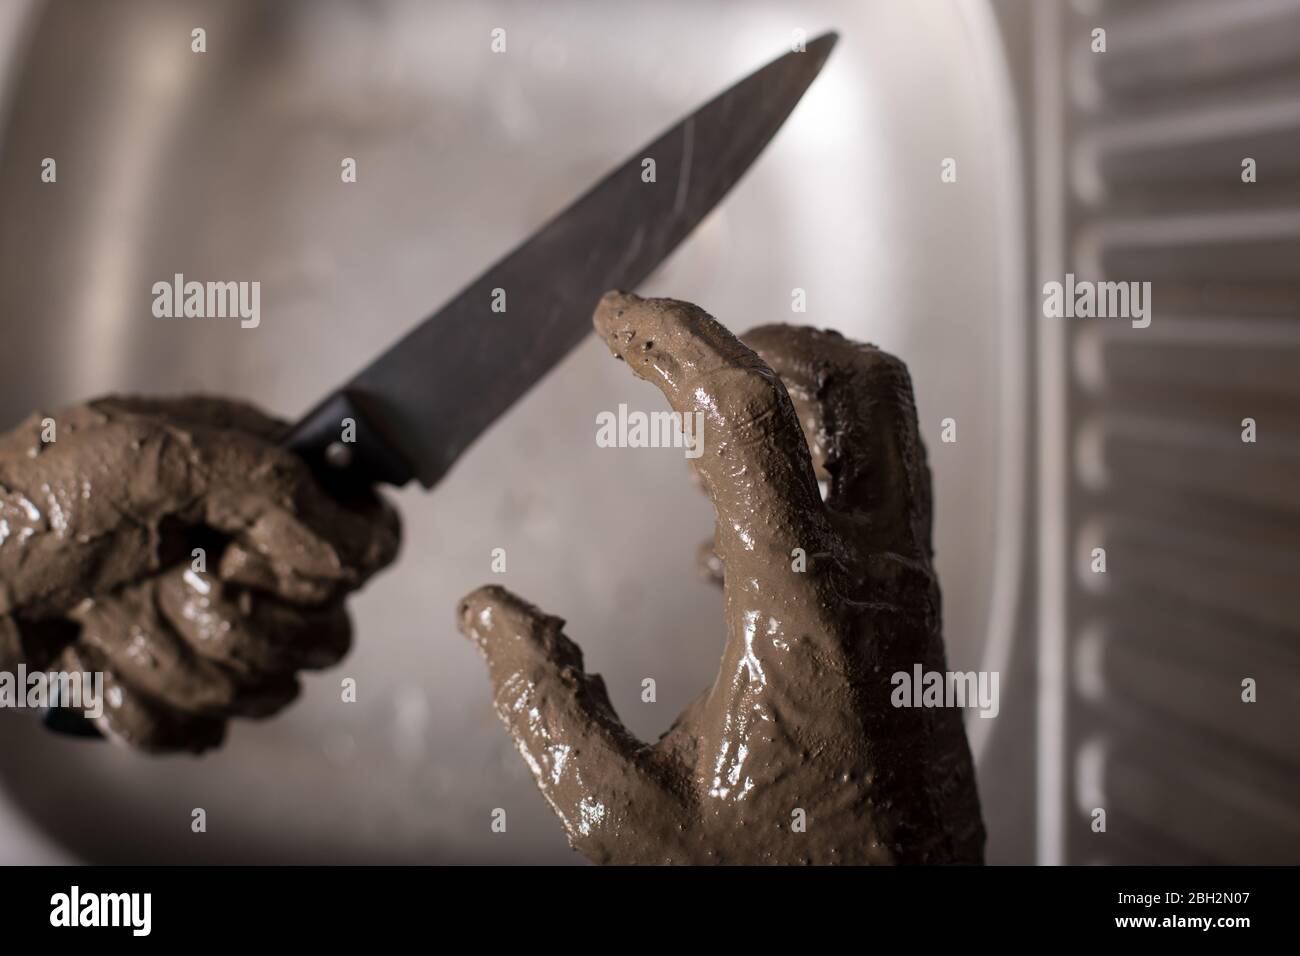 Dirty hands of killer holding a knife. Trying to wash away the traces of a crime Stock Photo